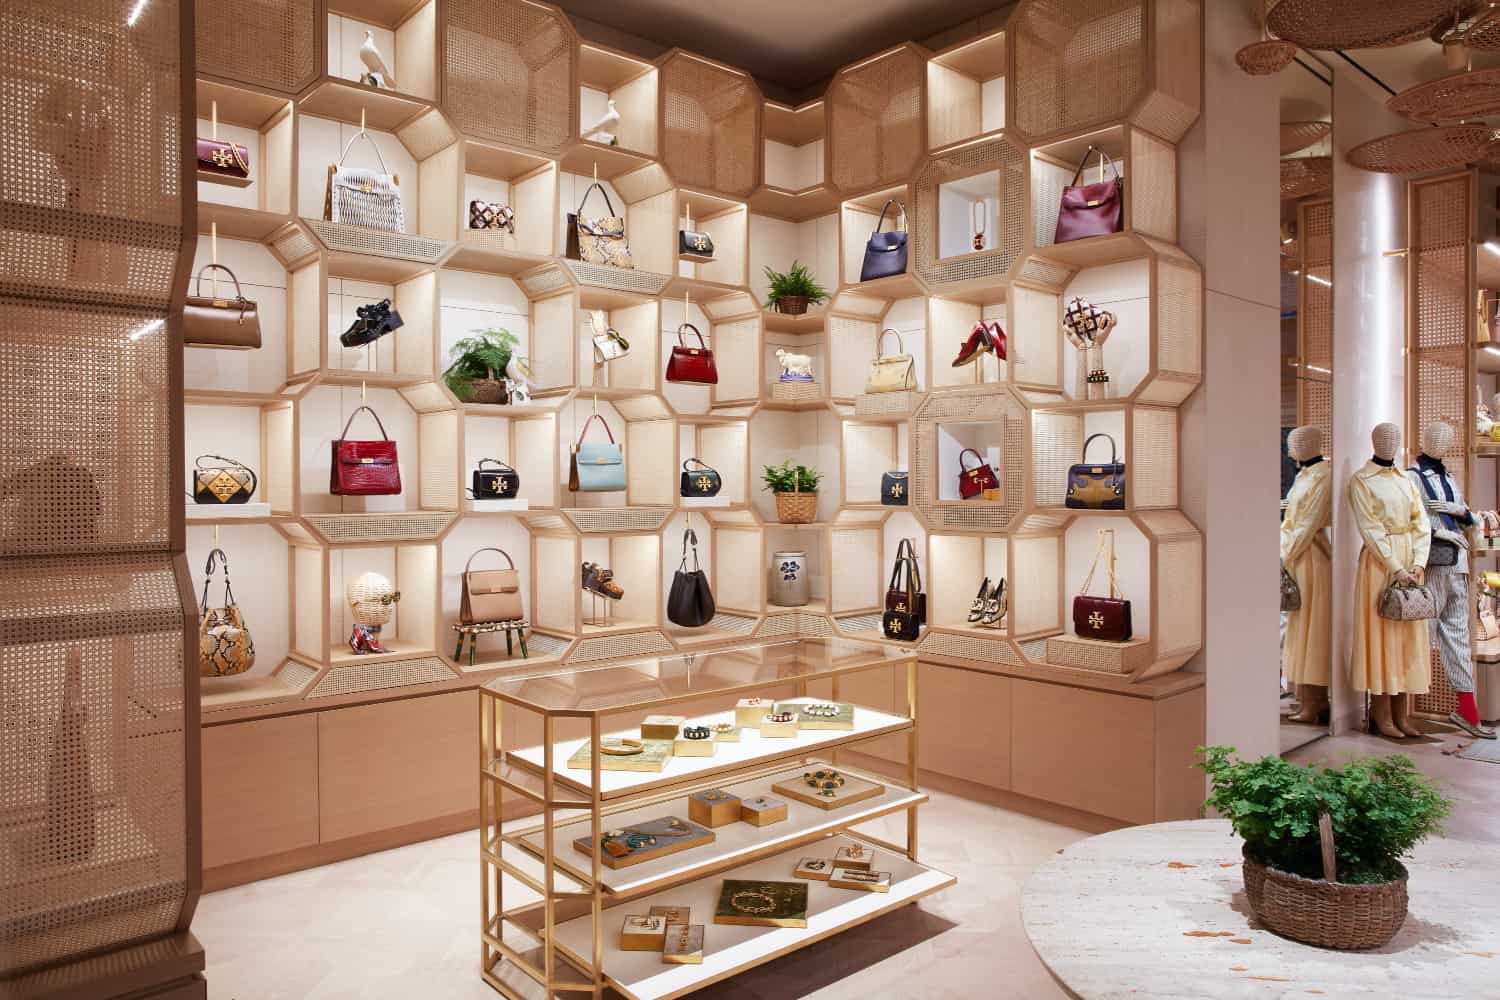 A Peek Inside Tory Burch's “Most Personal” Store Yet - Daily Front Row